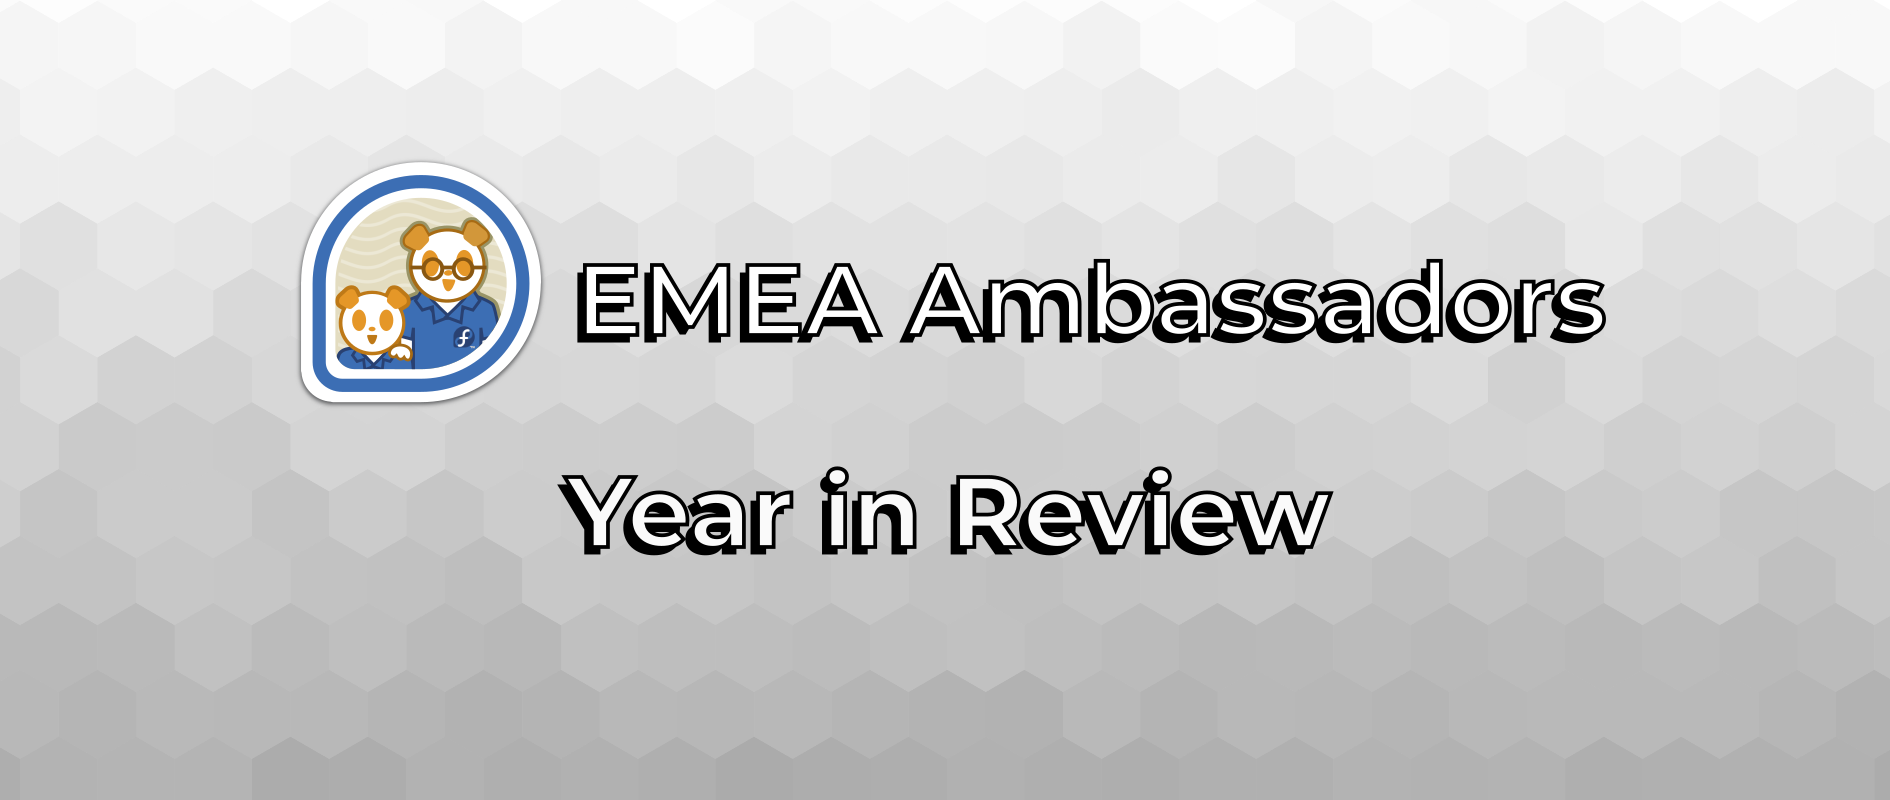 EMEA Ambassadors: 2017 Year in Review